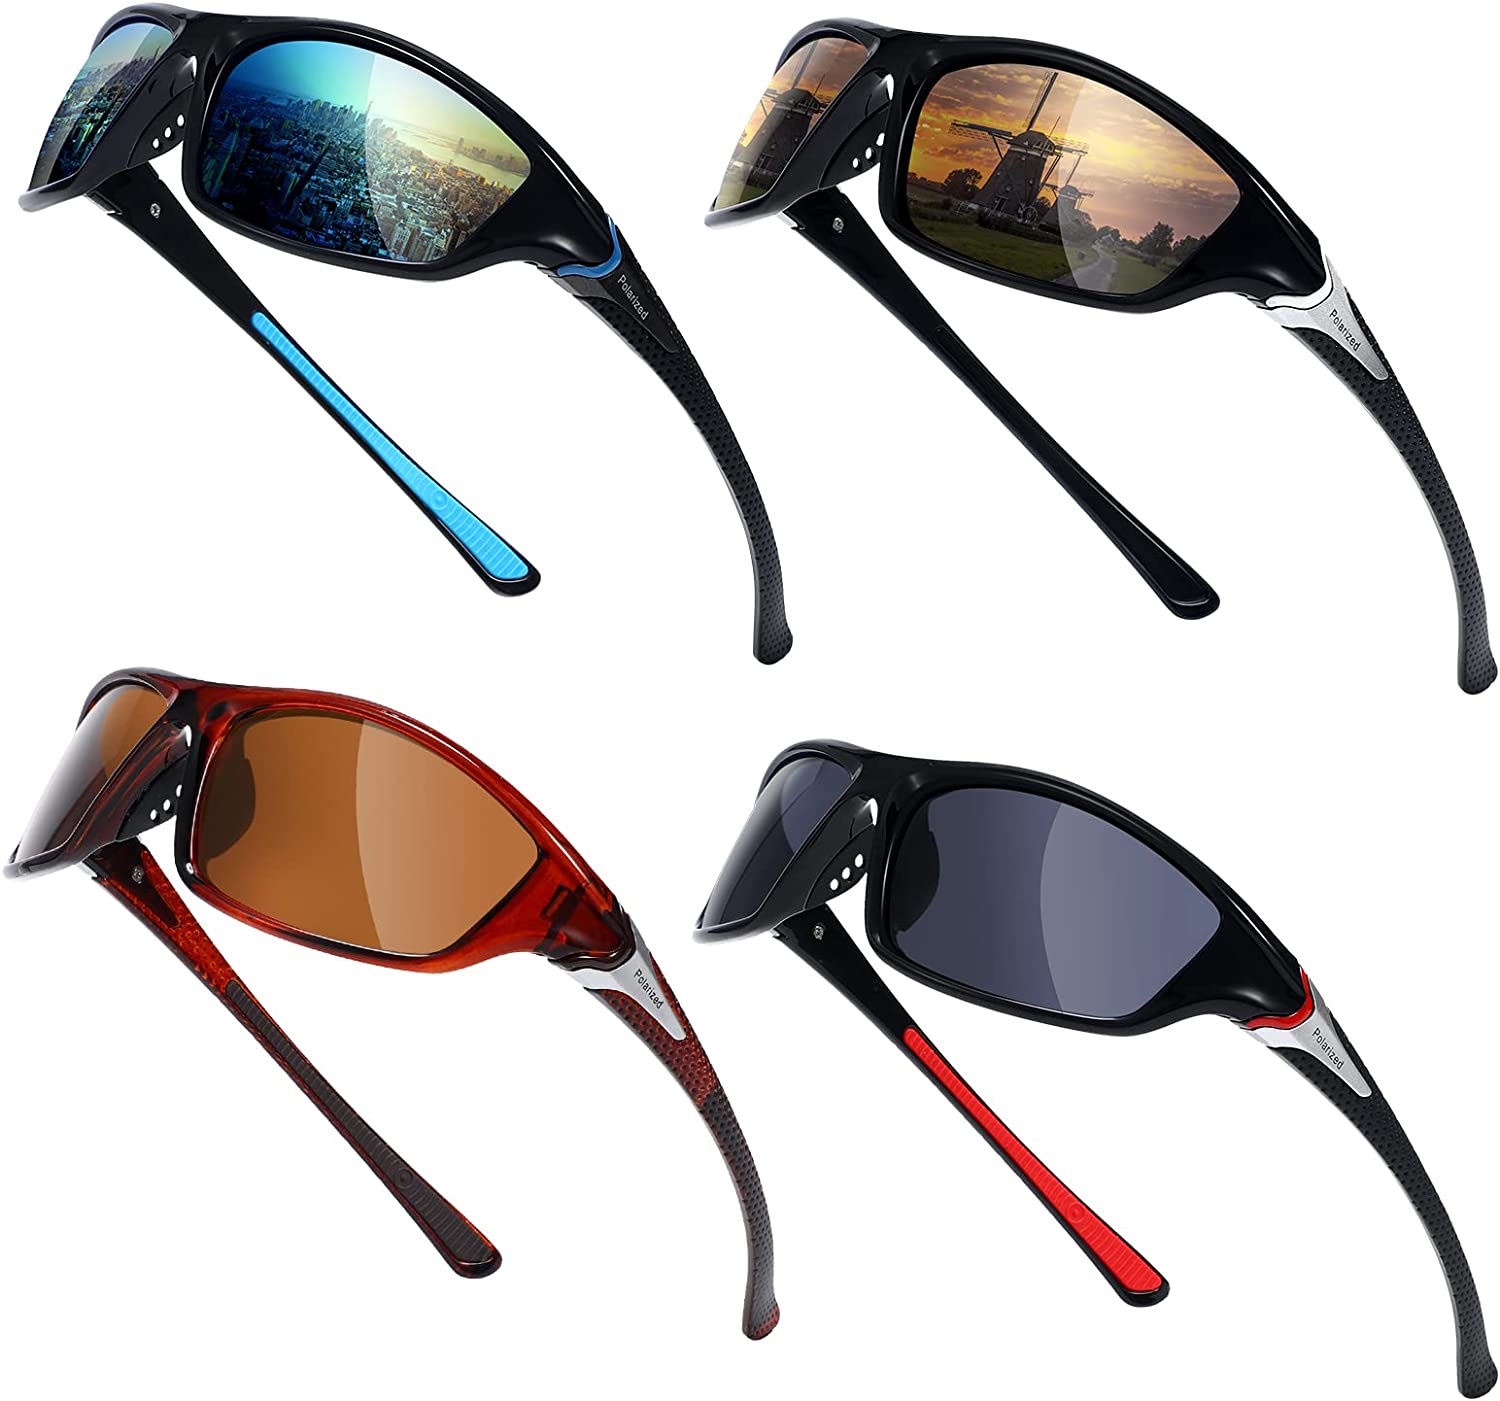 TOODOO 4 Pairs Men Polarized Sunglasses with UV Protection Driving